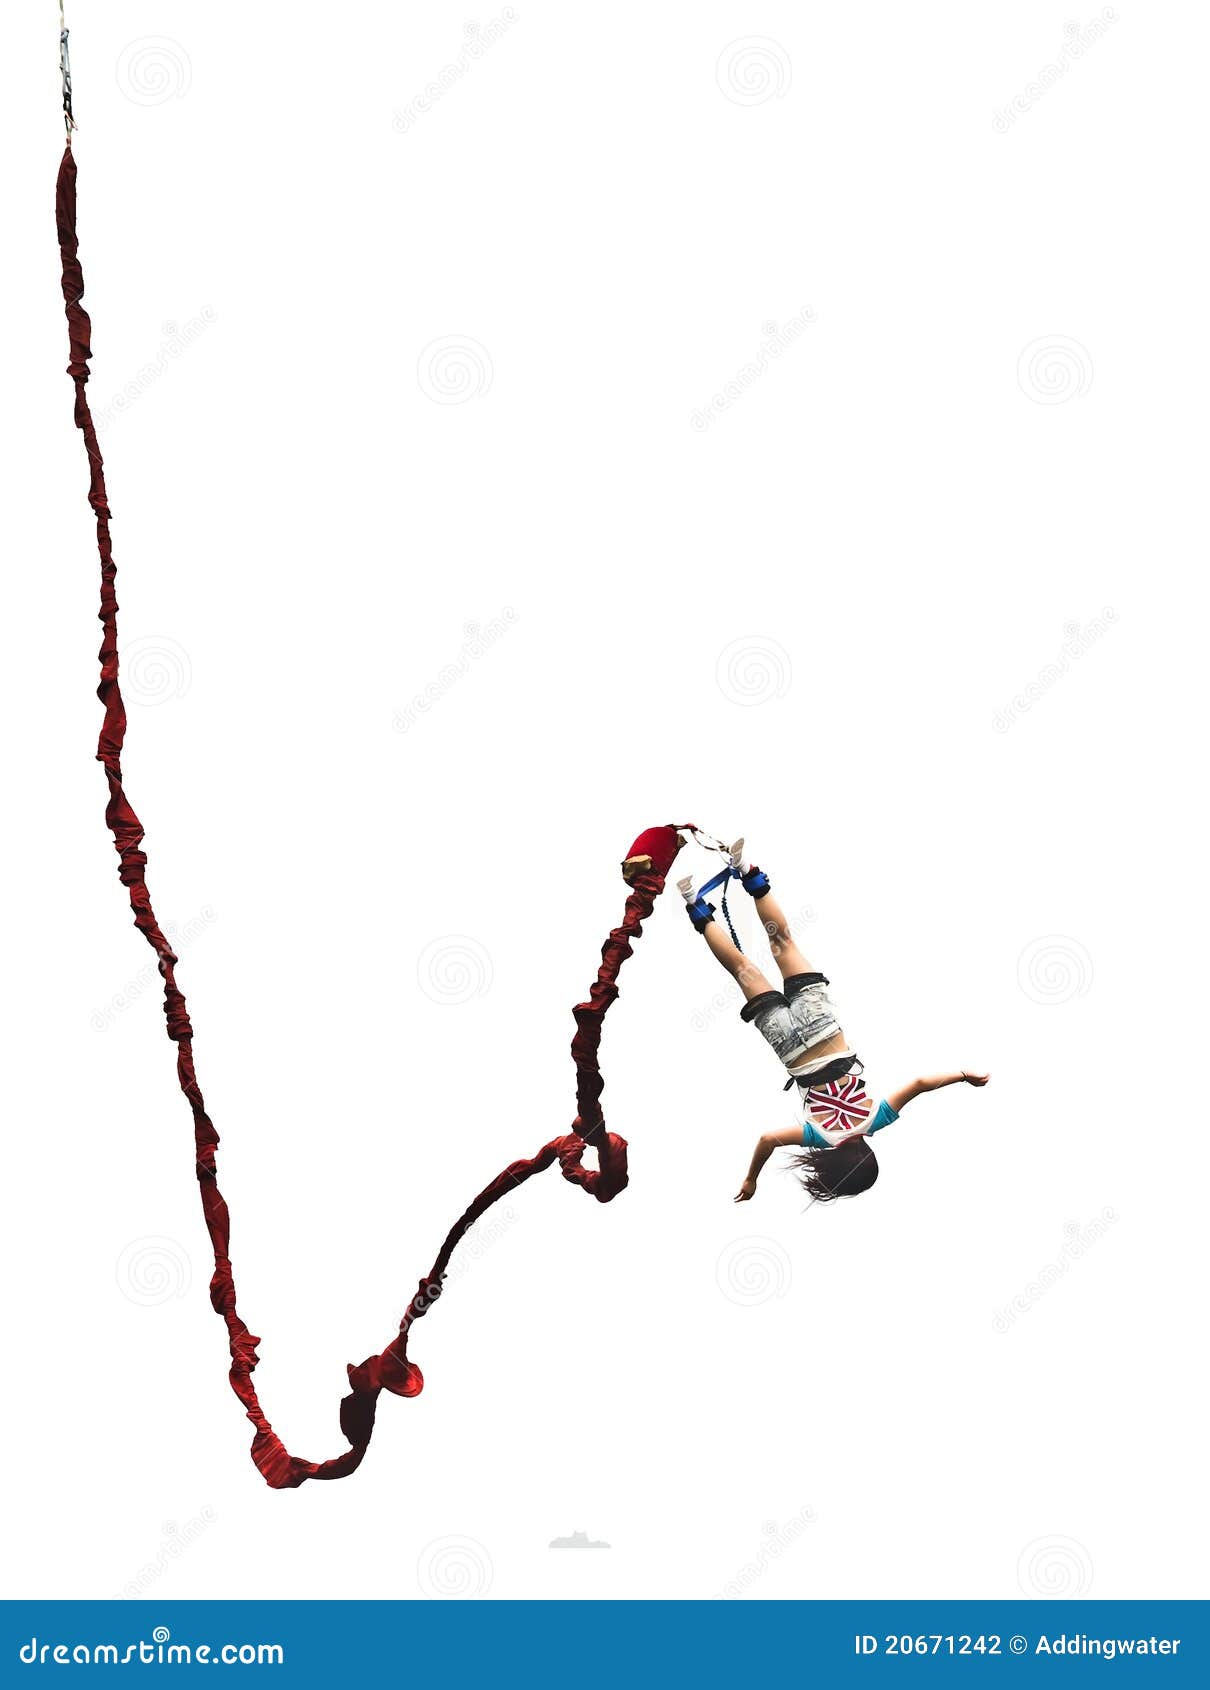 clipart bungee jumping - photo #14